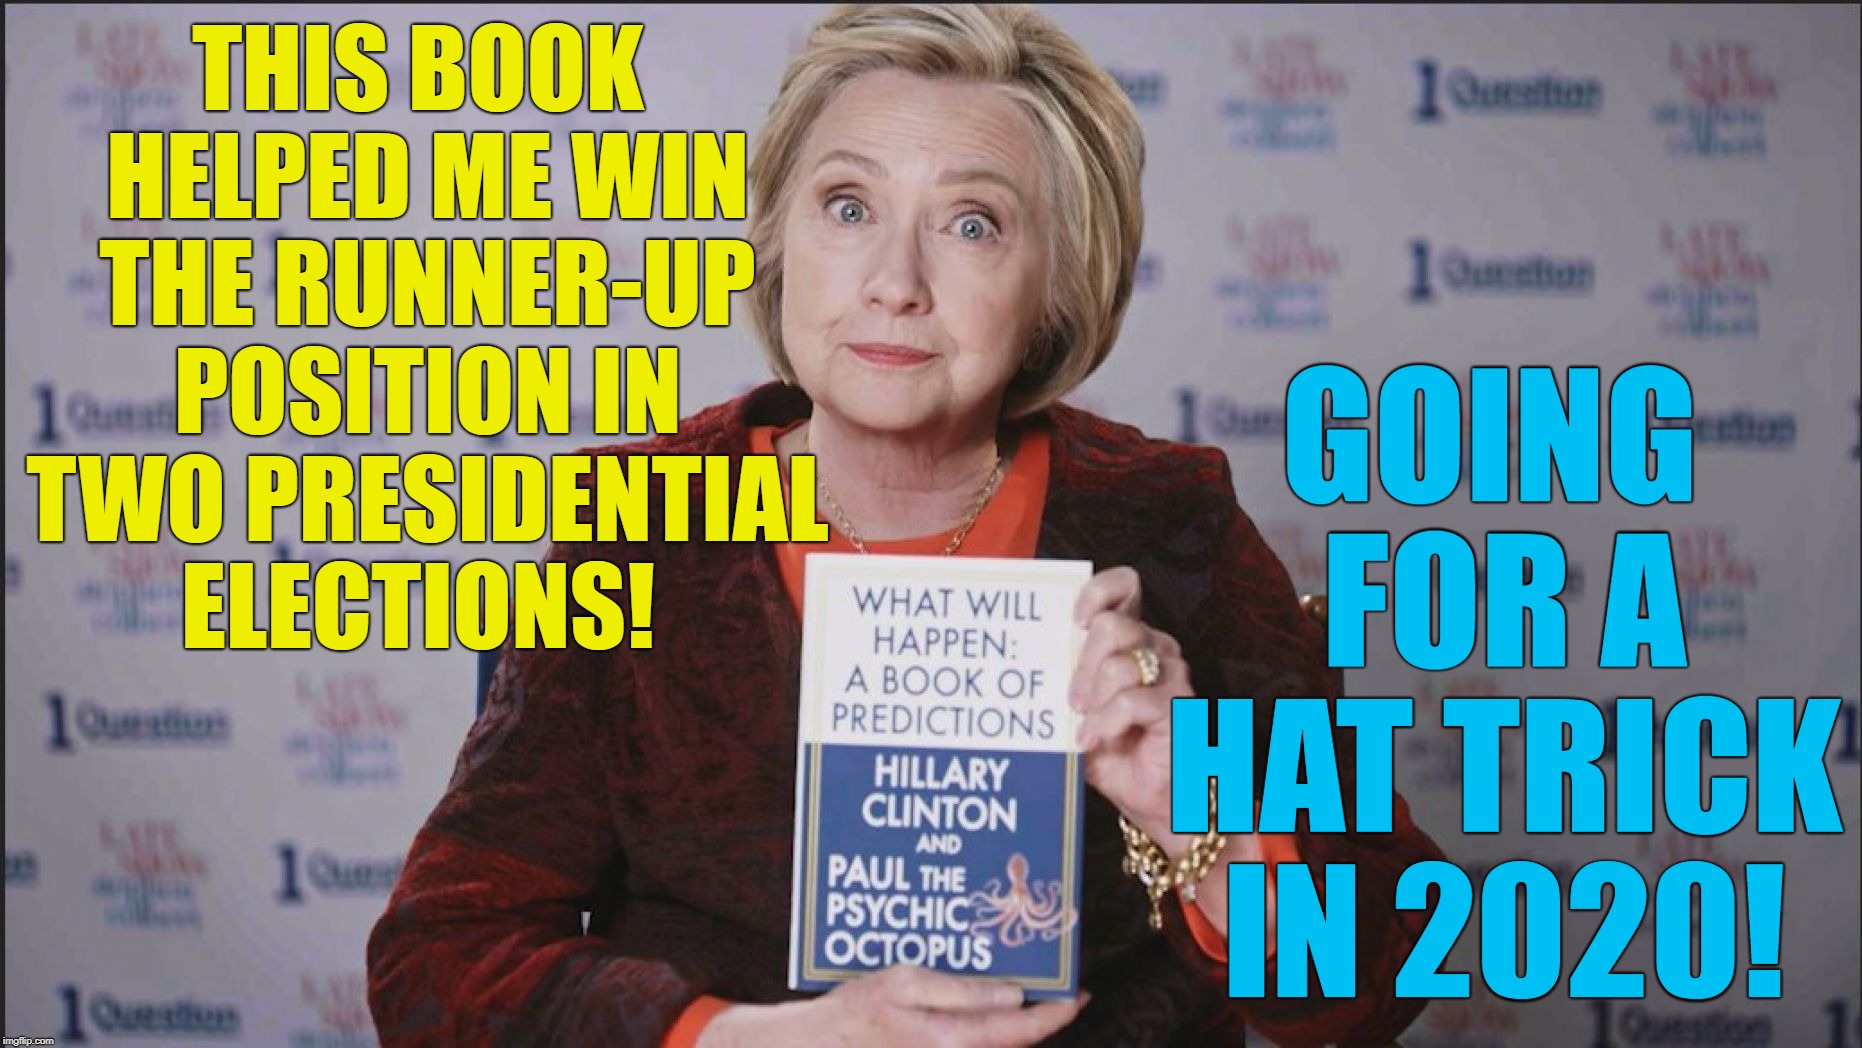 Hillary Clinton Delusions of Grandeur.  | GOING FOR A HAT TRICK IN 2020! THIS BOOK HELPED ME WIN THE RUNNER-UP POSITION IN TWO PRESIDENTIAL ELECTIONS! | image tagged in presidential election,delusions,loser,hillary clinton colbert both still losers | made w/ Imgflip meme maker